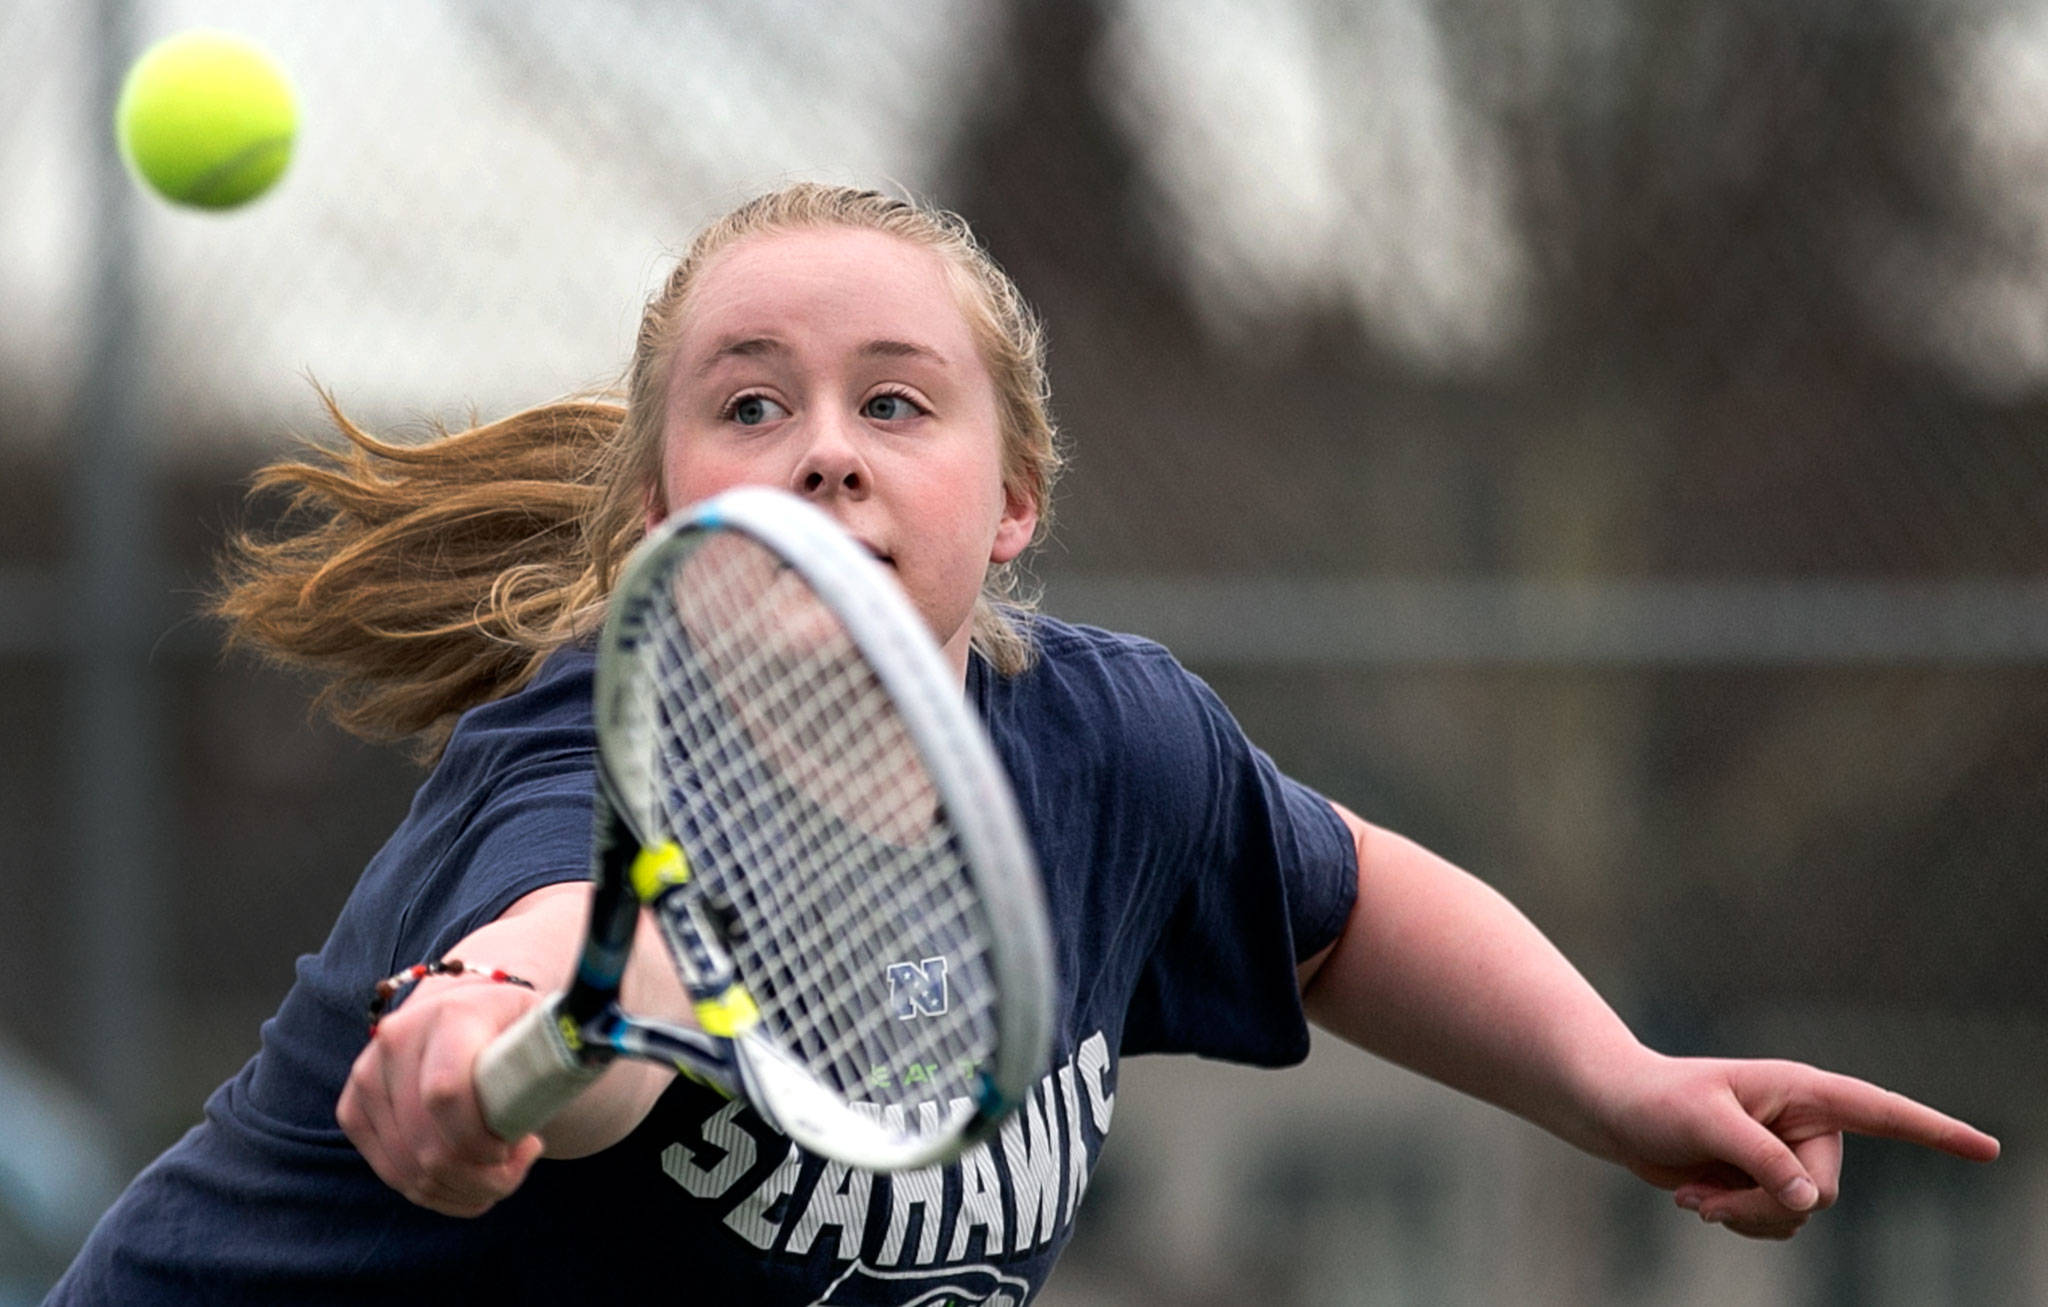 Katri Shields works through practice Wednesday afternoon at Snohomish High School on March 7, 2018. (Kevin Clark / The Daily Herald)